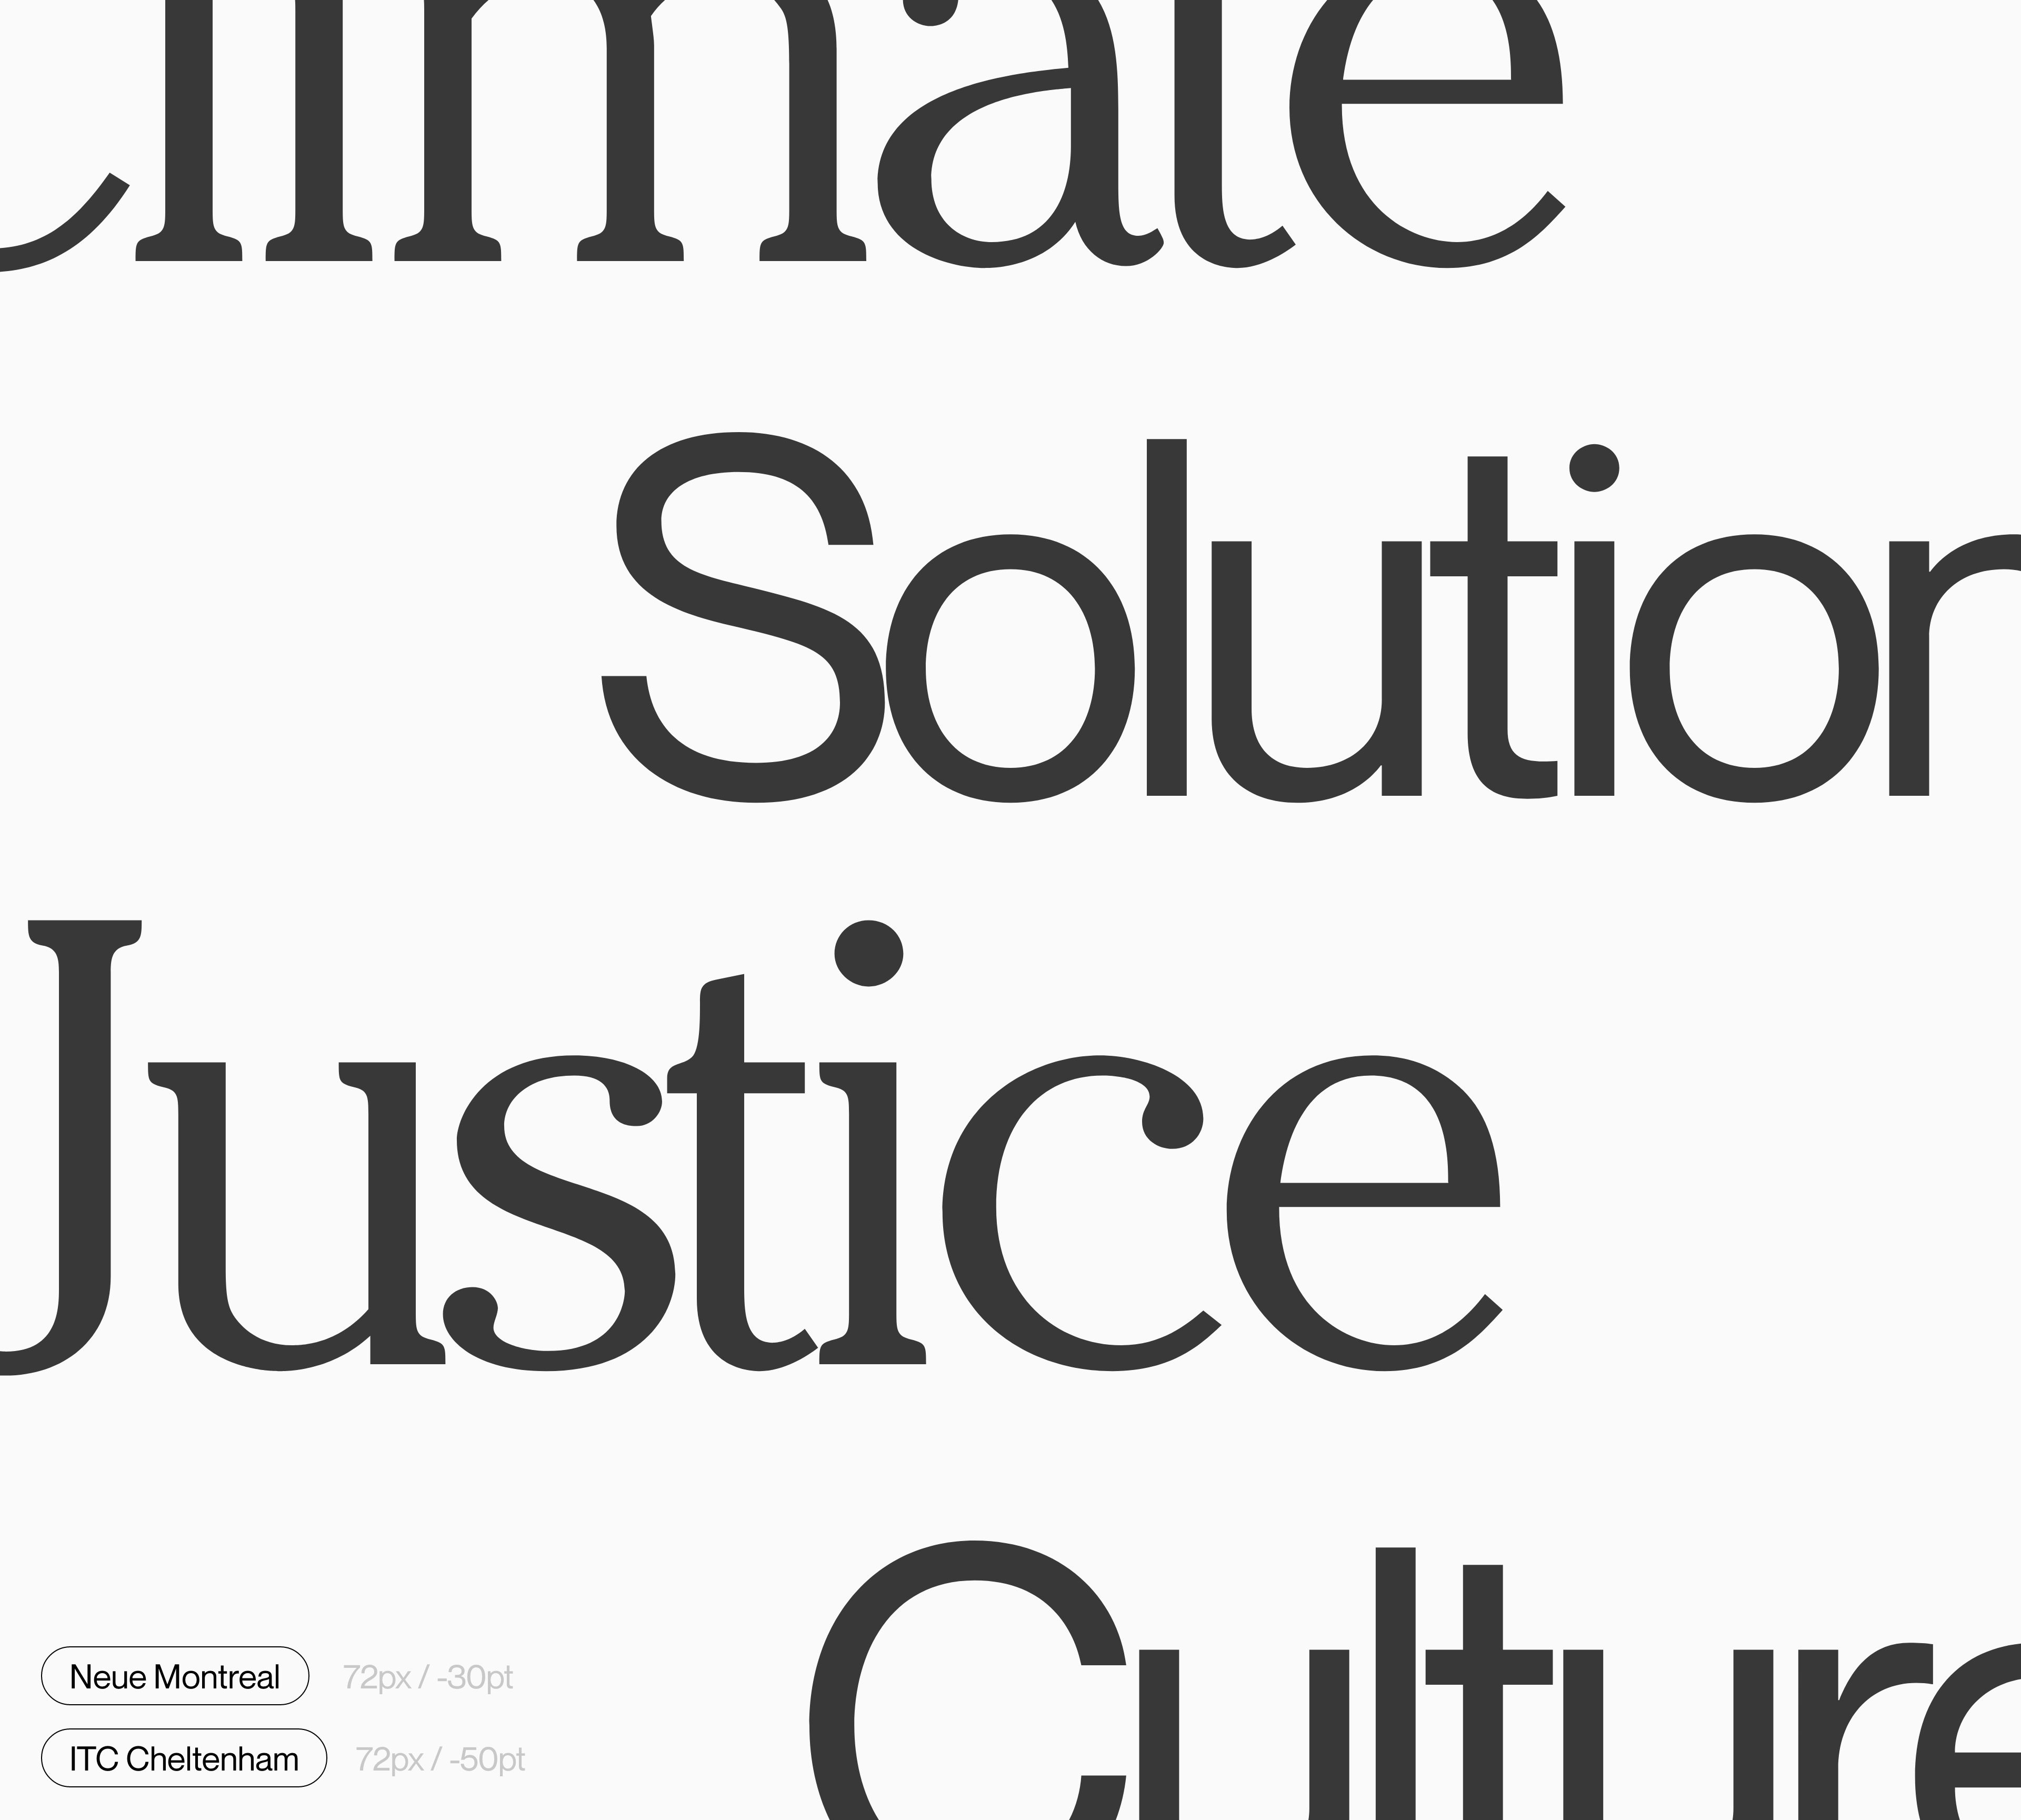 A showcase of the typefaces used throughout the earthrise brand